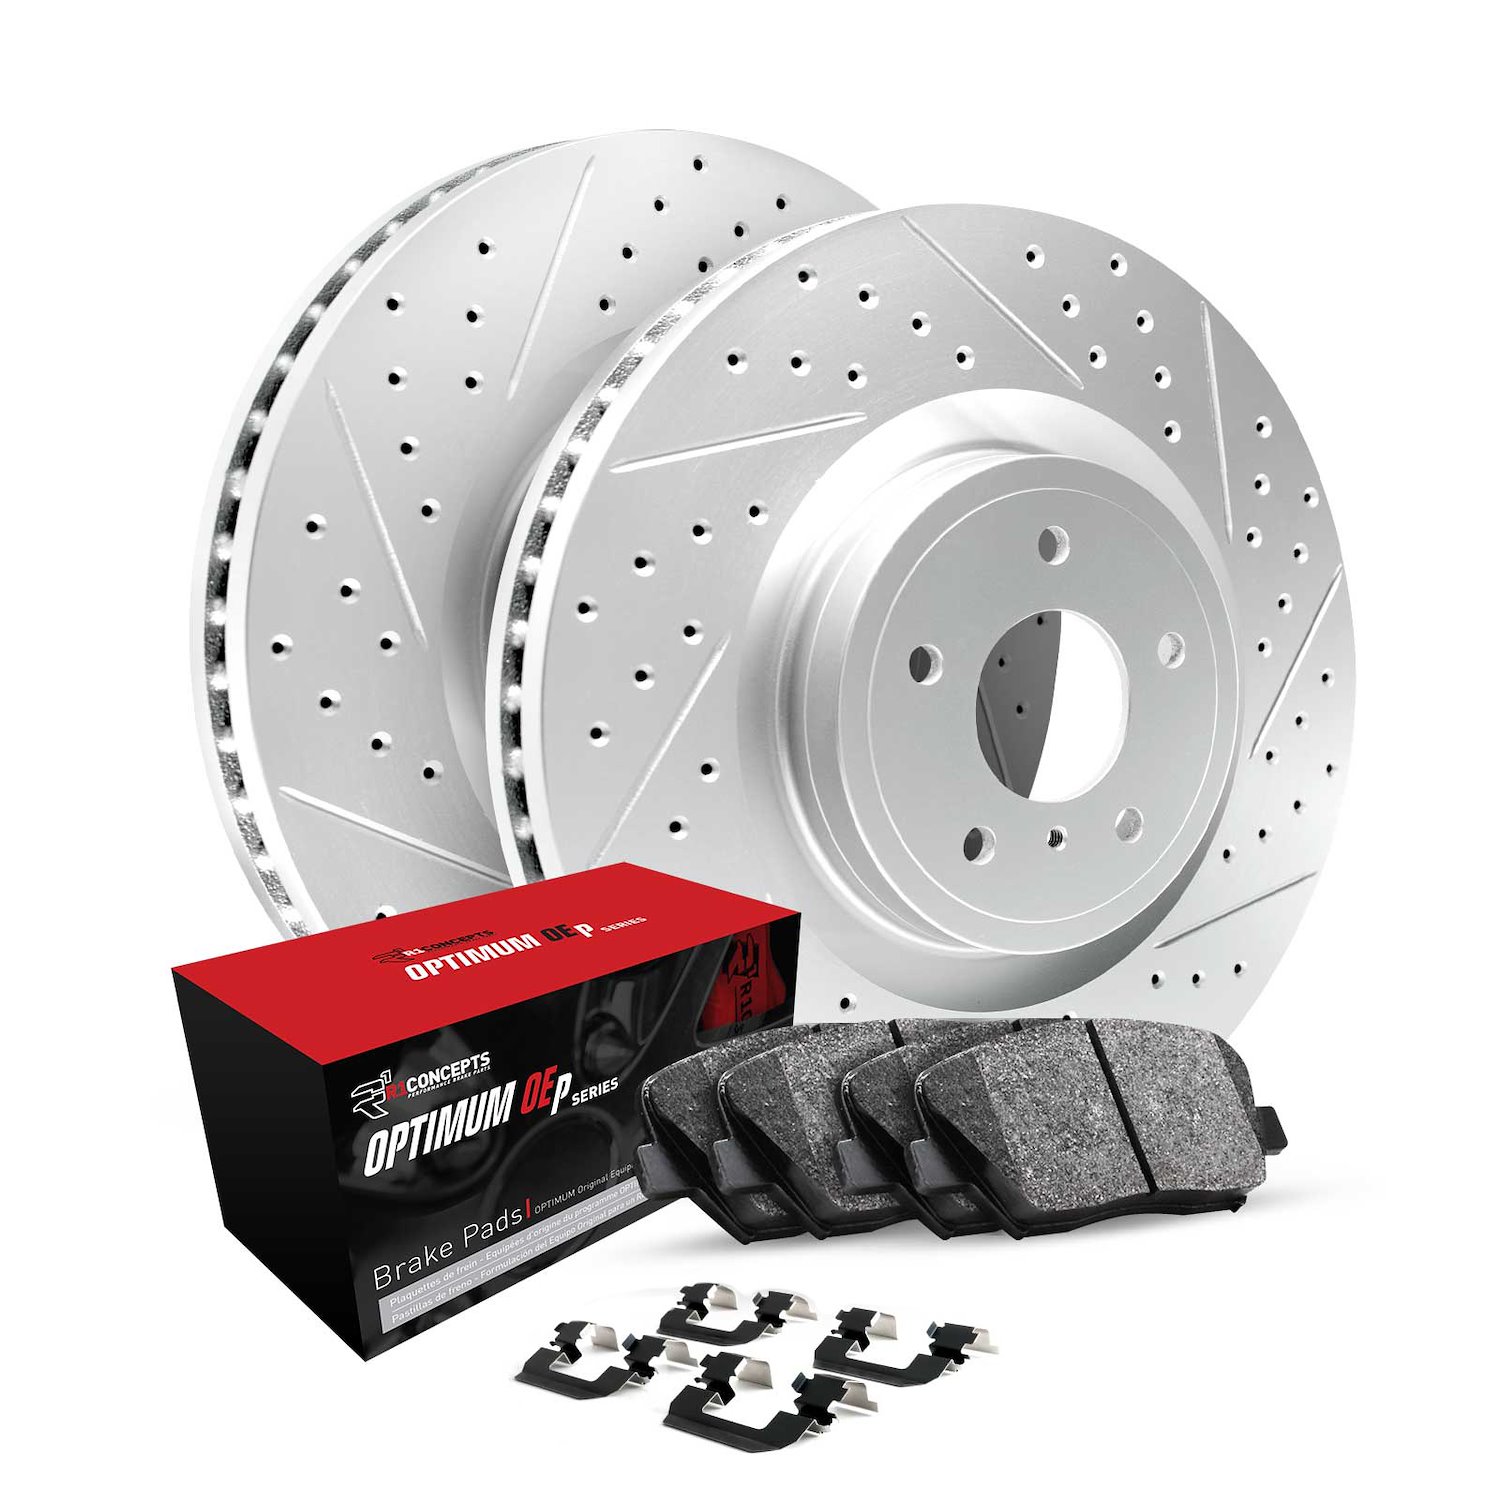 GEO-Carbon Drilled & Slotted Brake Rotor Set w/Optimum OE Pads & Hardware, 2000-2008 Fits Multiple Makes/Models